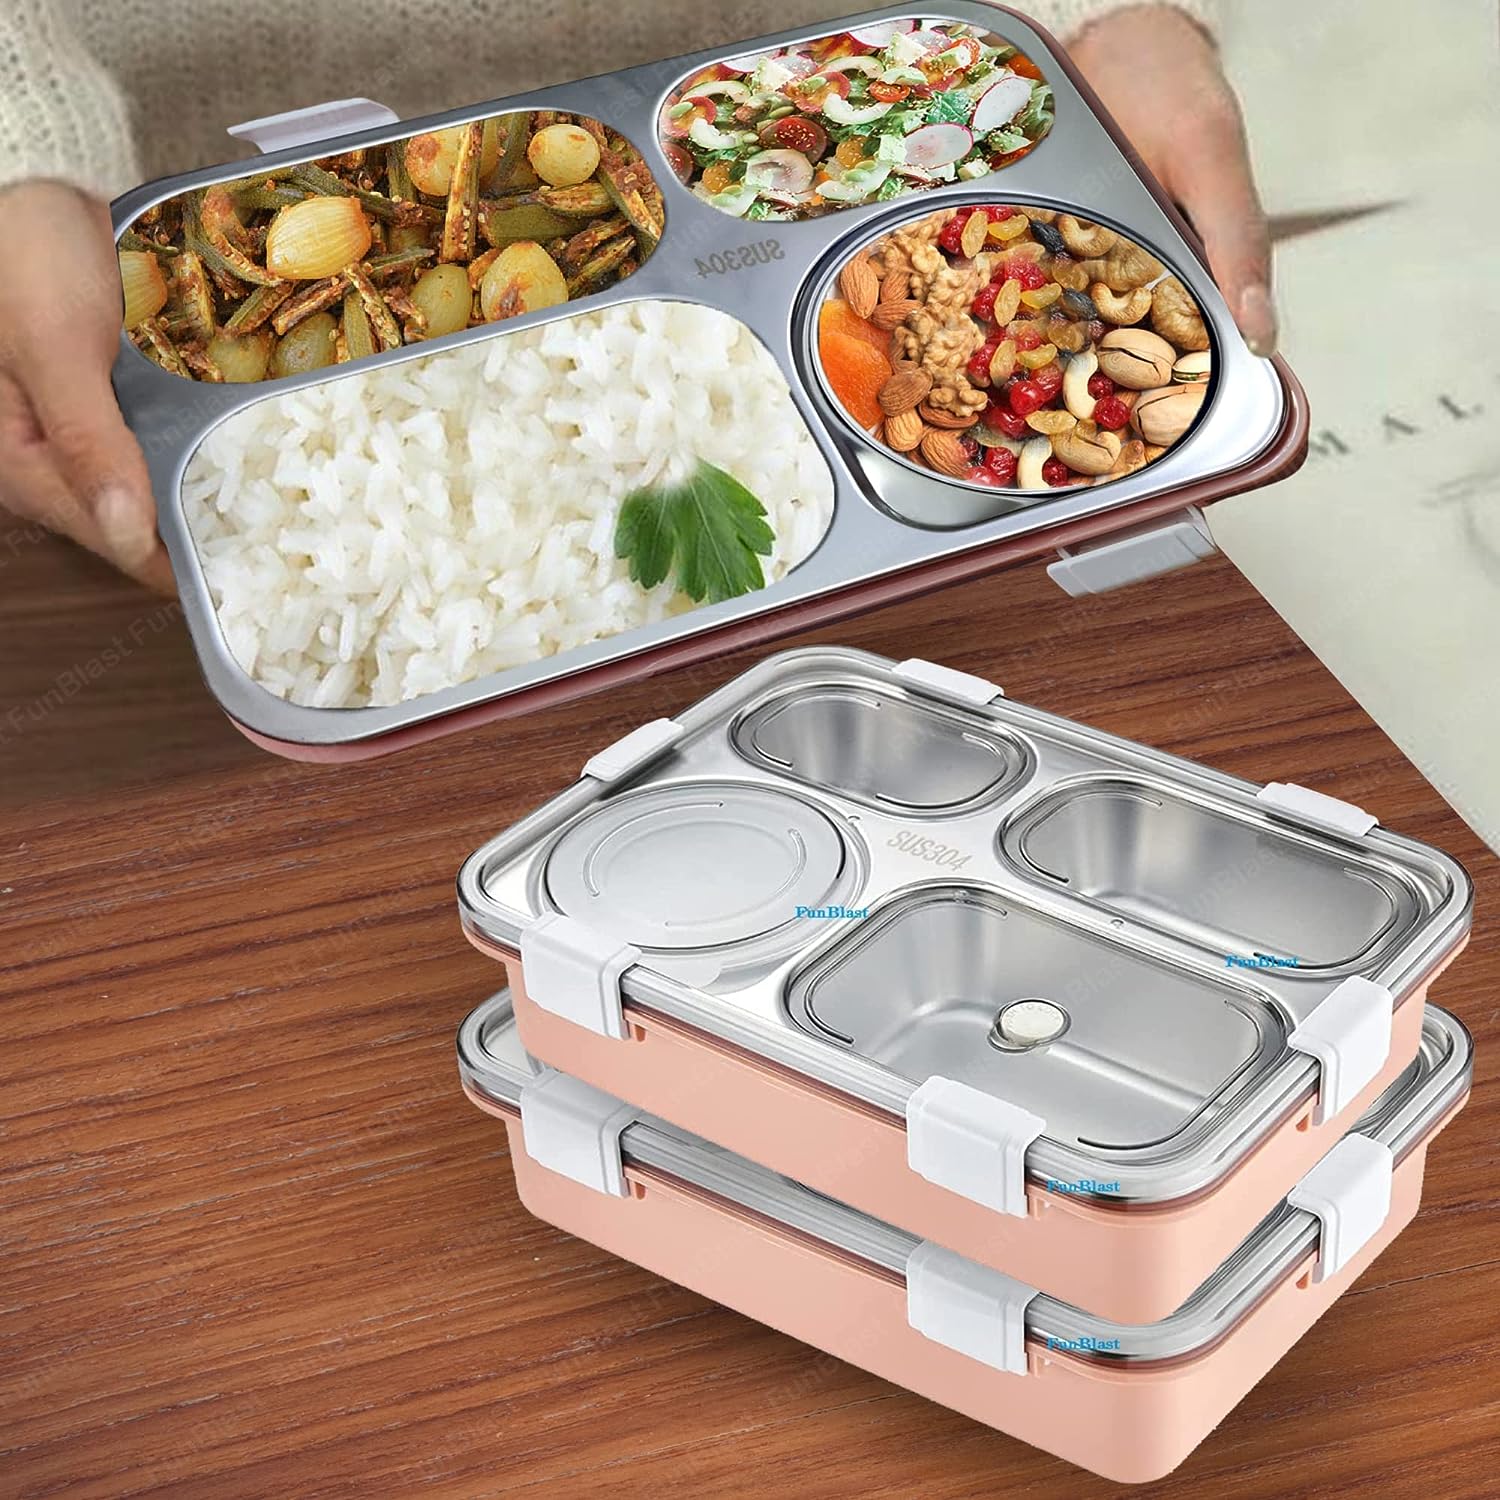 Lunch Box - Stainless Steel Lunch Box for Kids, Tiffin Box, Lunch Box with Spoon and Fork, Bento Lunch Box, Lunch Box for Kids, Insulated Lunch Box, Lunch Box for Office Women & Men (Not Leak-Proof - for Dry Foods Only)